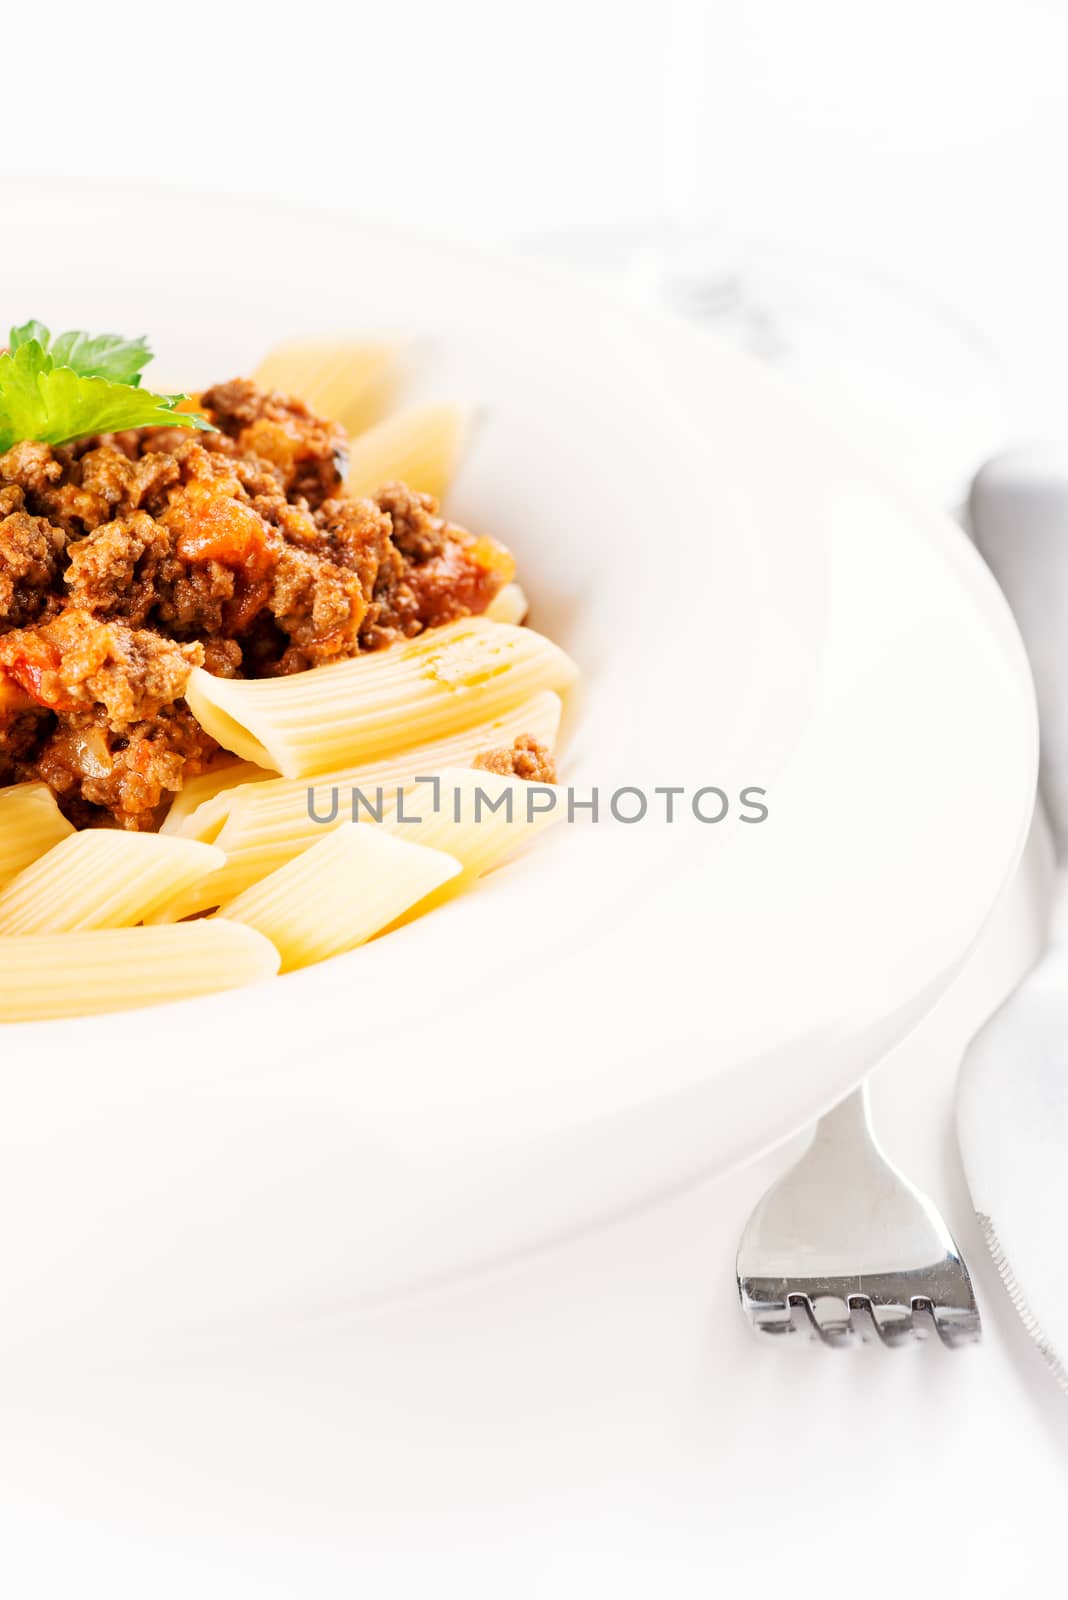 Penne Pasta with Bolognese Sauce copy space by Nanisimova